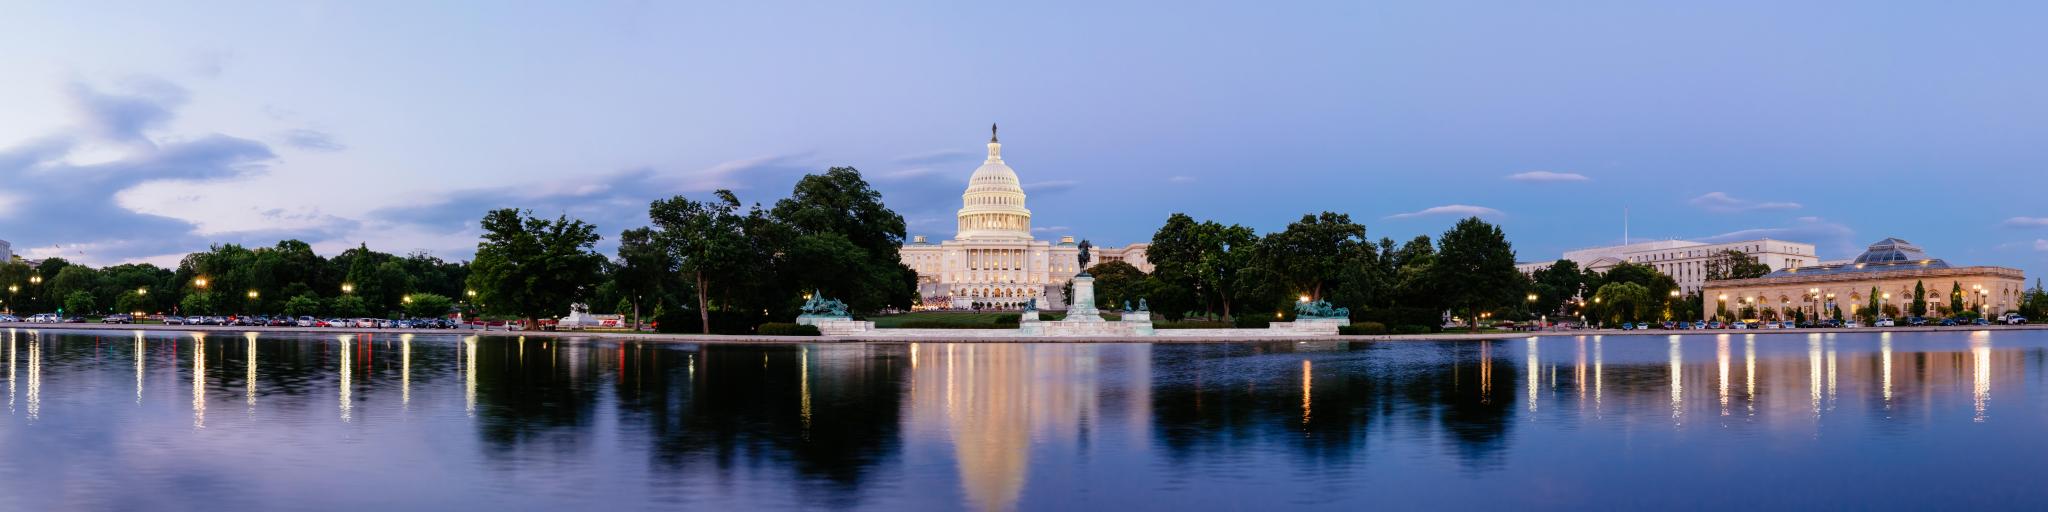 United States Capitol building in Washington DC, with the Capitol Reflecting Pool in the foreground, at dusk